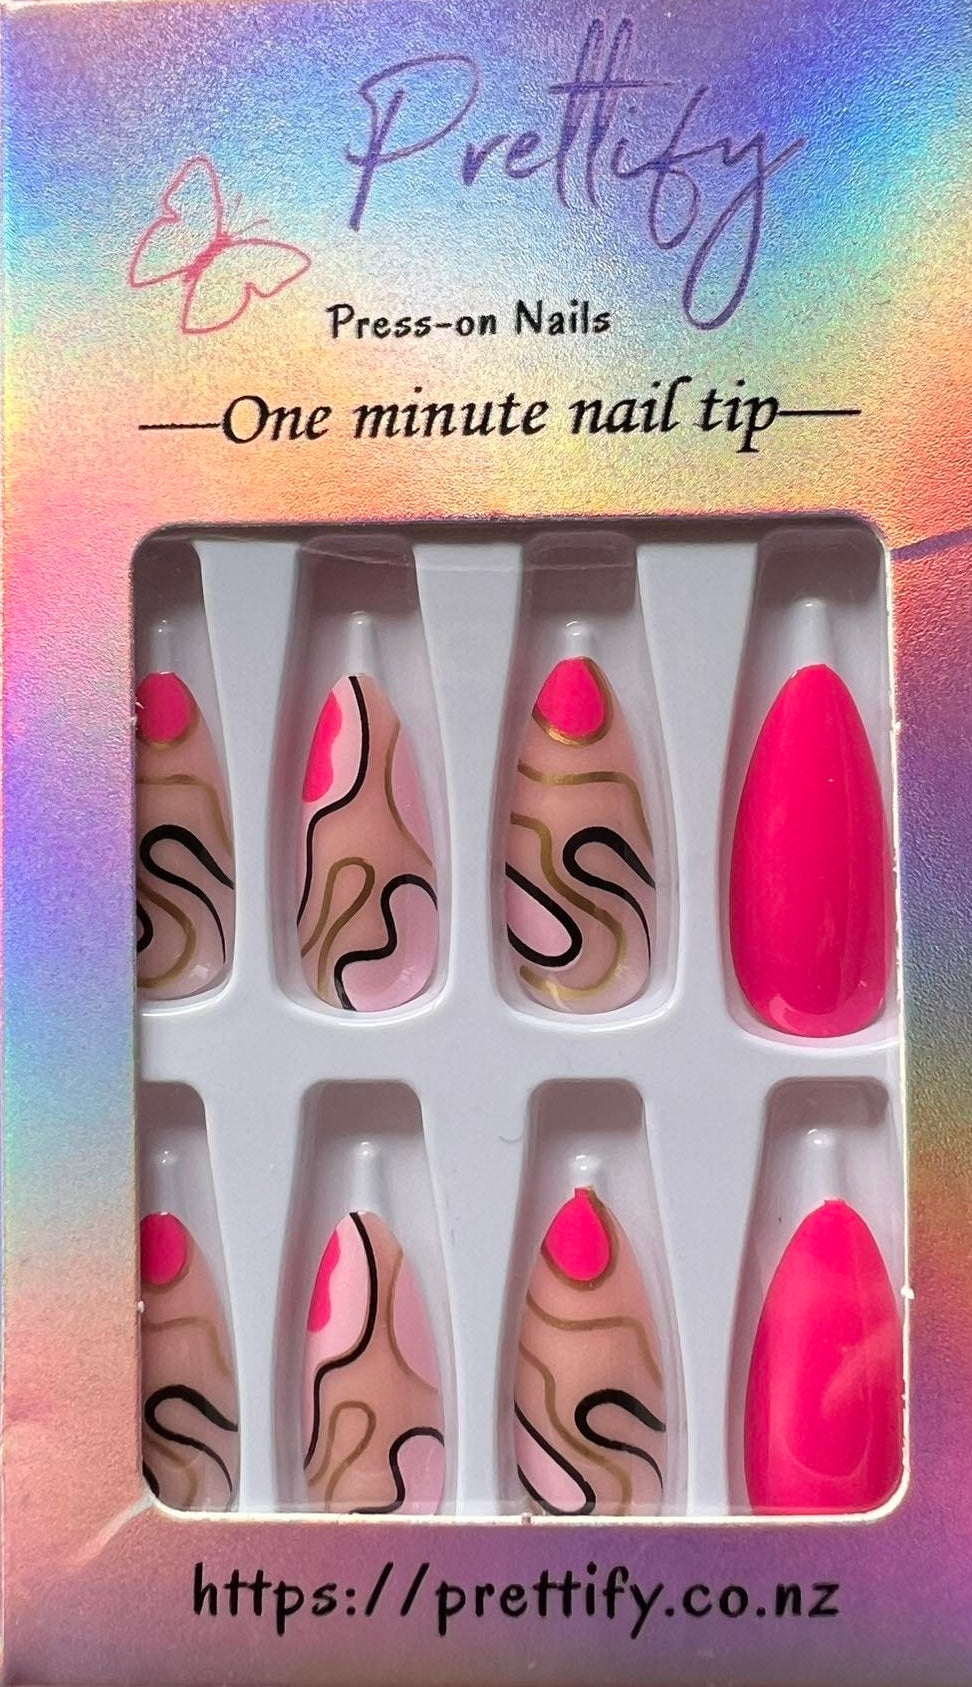 Almond Press on Nails Bright Pink & Patterned Bright & Pale Pink with Black & Gold Outlines. Durable Acrylic Press on Nails. Easy and quick to apply. Great for those special occasions, parties or add an edge to any outfit. Gorgeous, flattering and you can re-use them again and again.